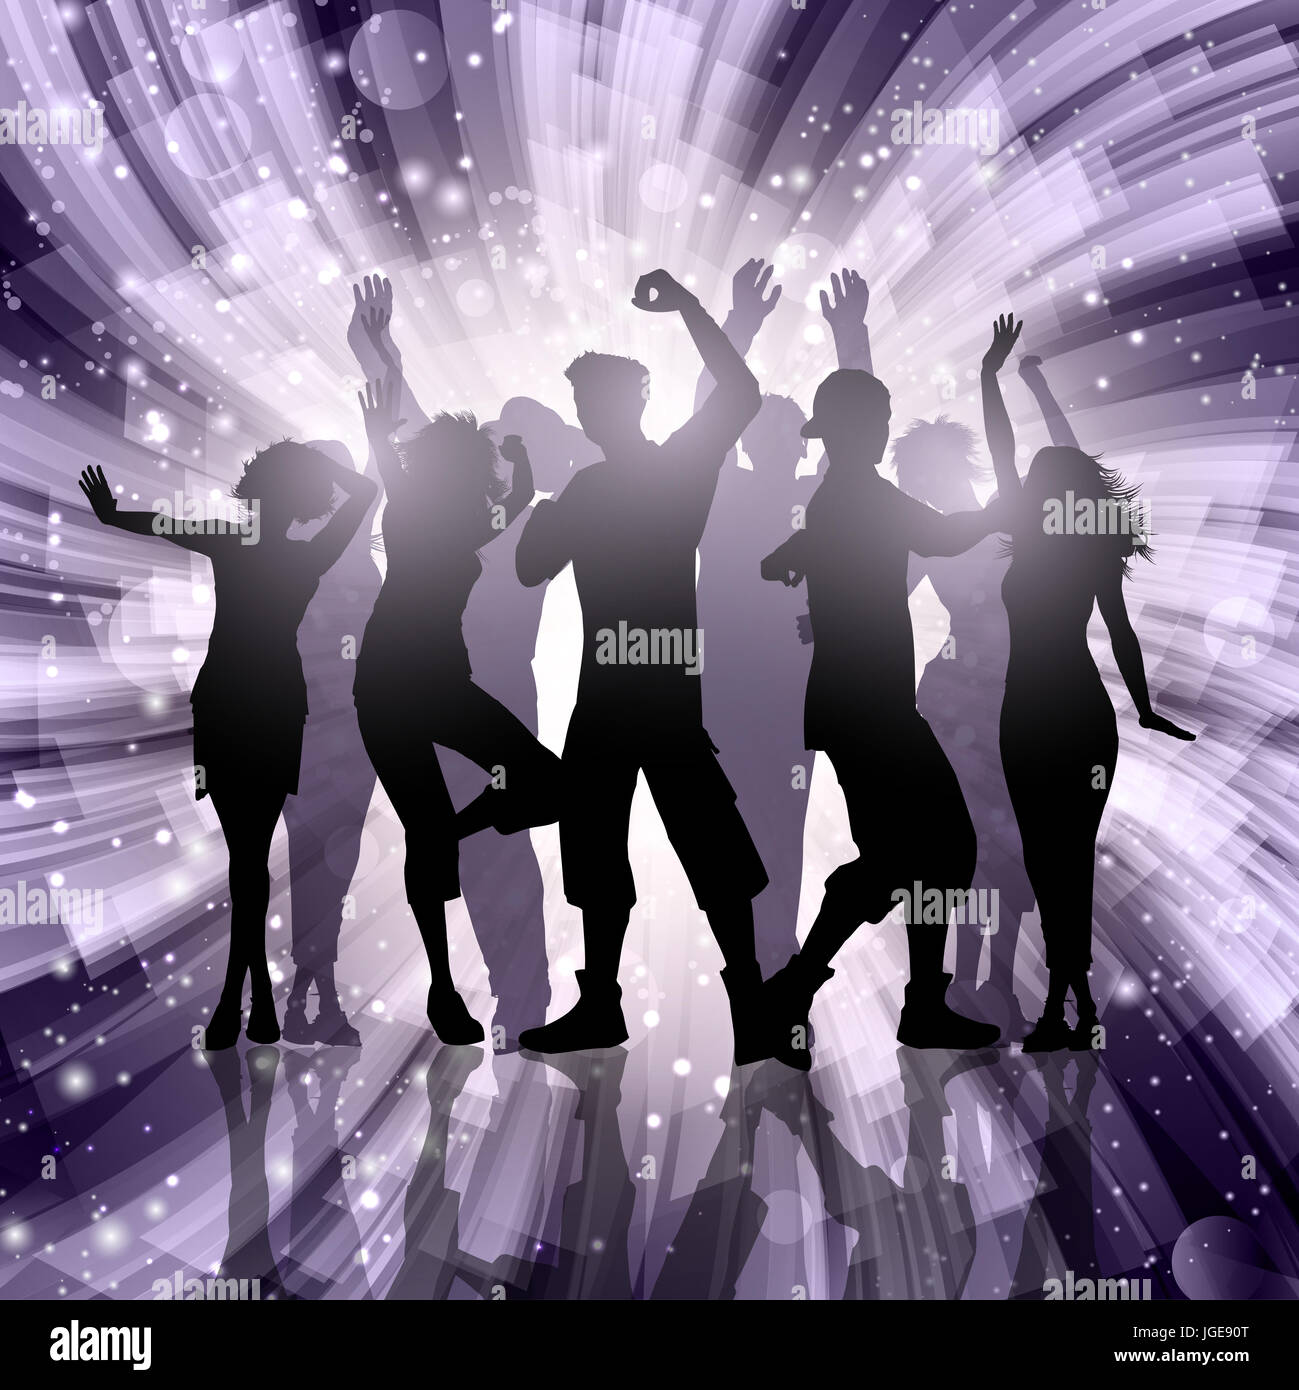 Silhouettes of party people on an abstract swirl background Stock Photo